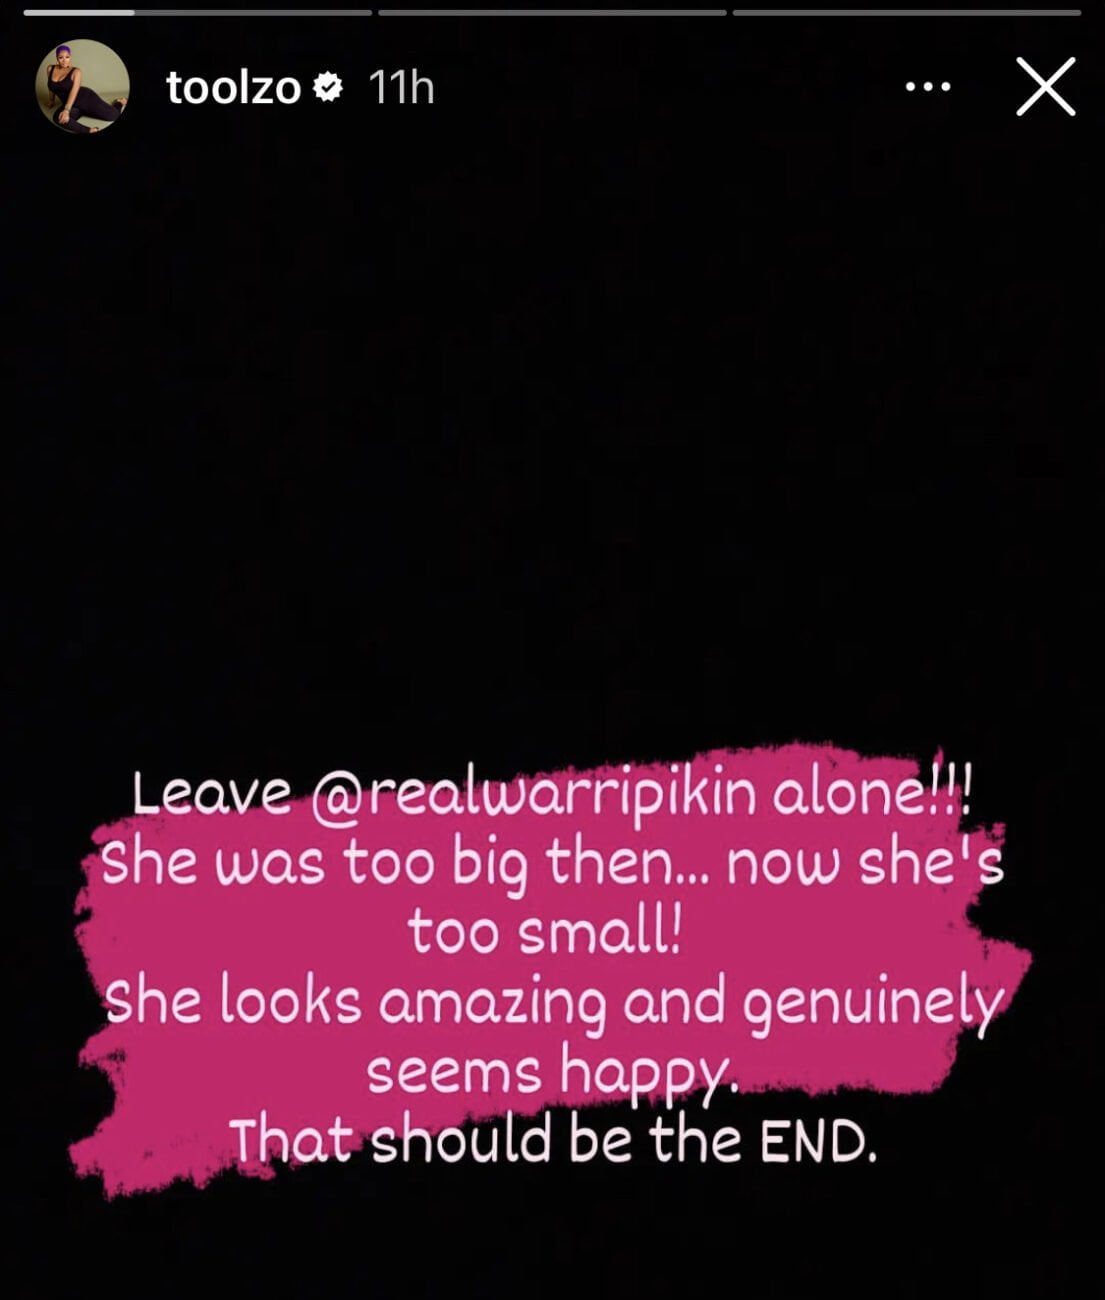 Toolz's post slamming netizens over their comments on Real Warri Pikin's weight loss.